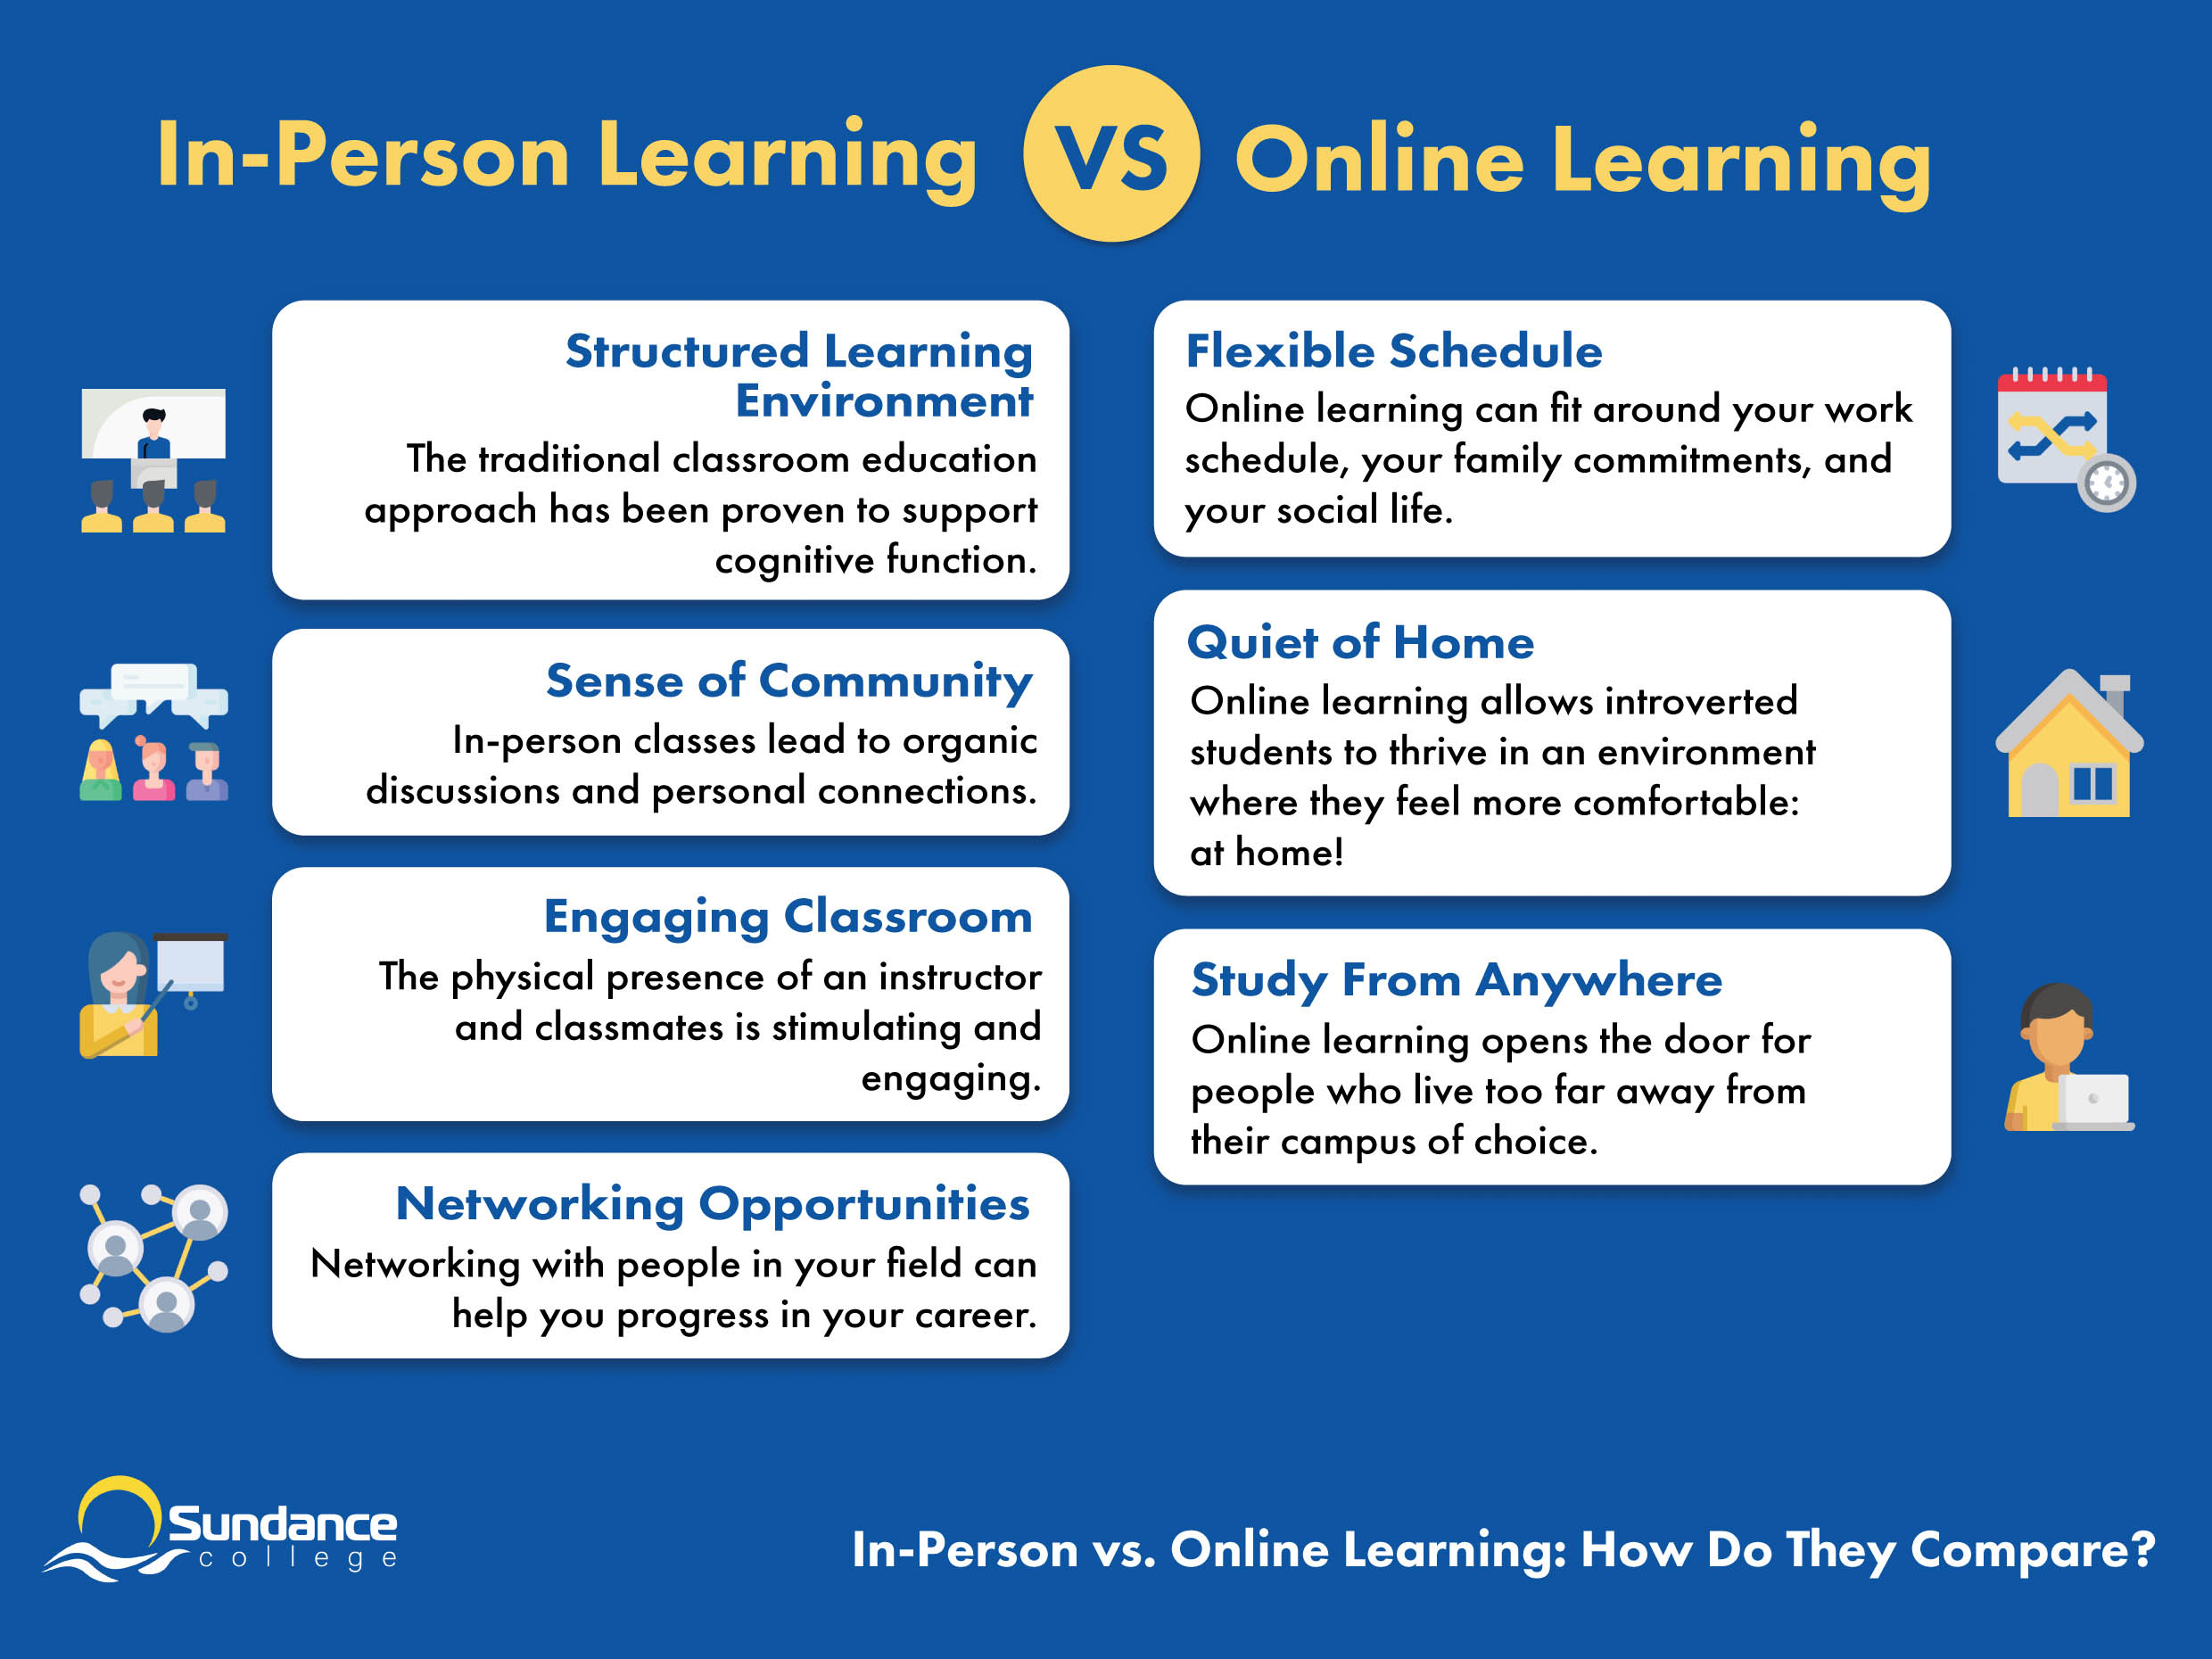 Infographic with benefits of in-person learning on the left side; learning environment, community, engagement, and networking; versus the benefits to online learning on the right side; flexibility, quiet, study from anywhere